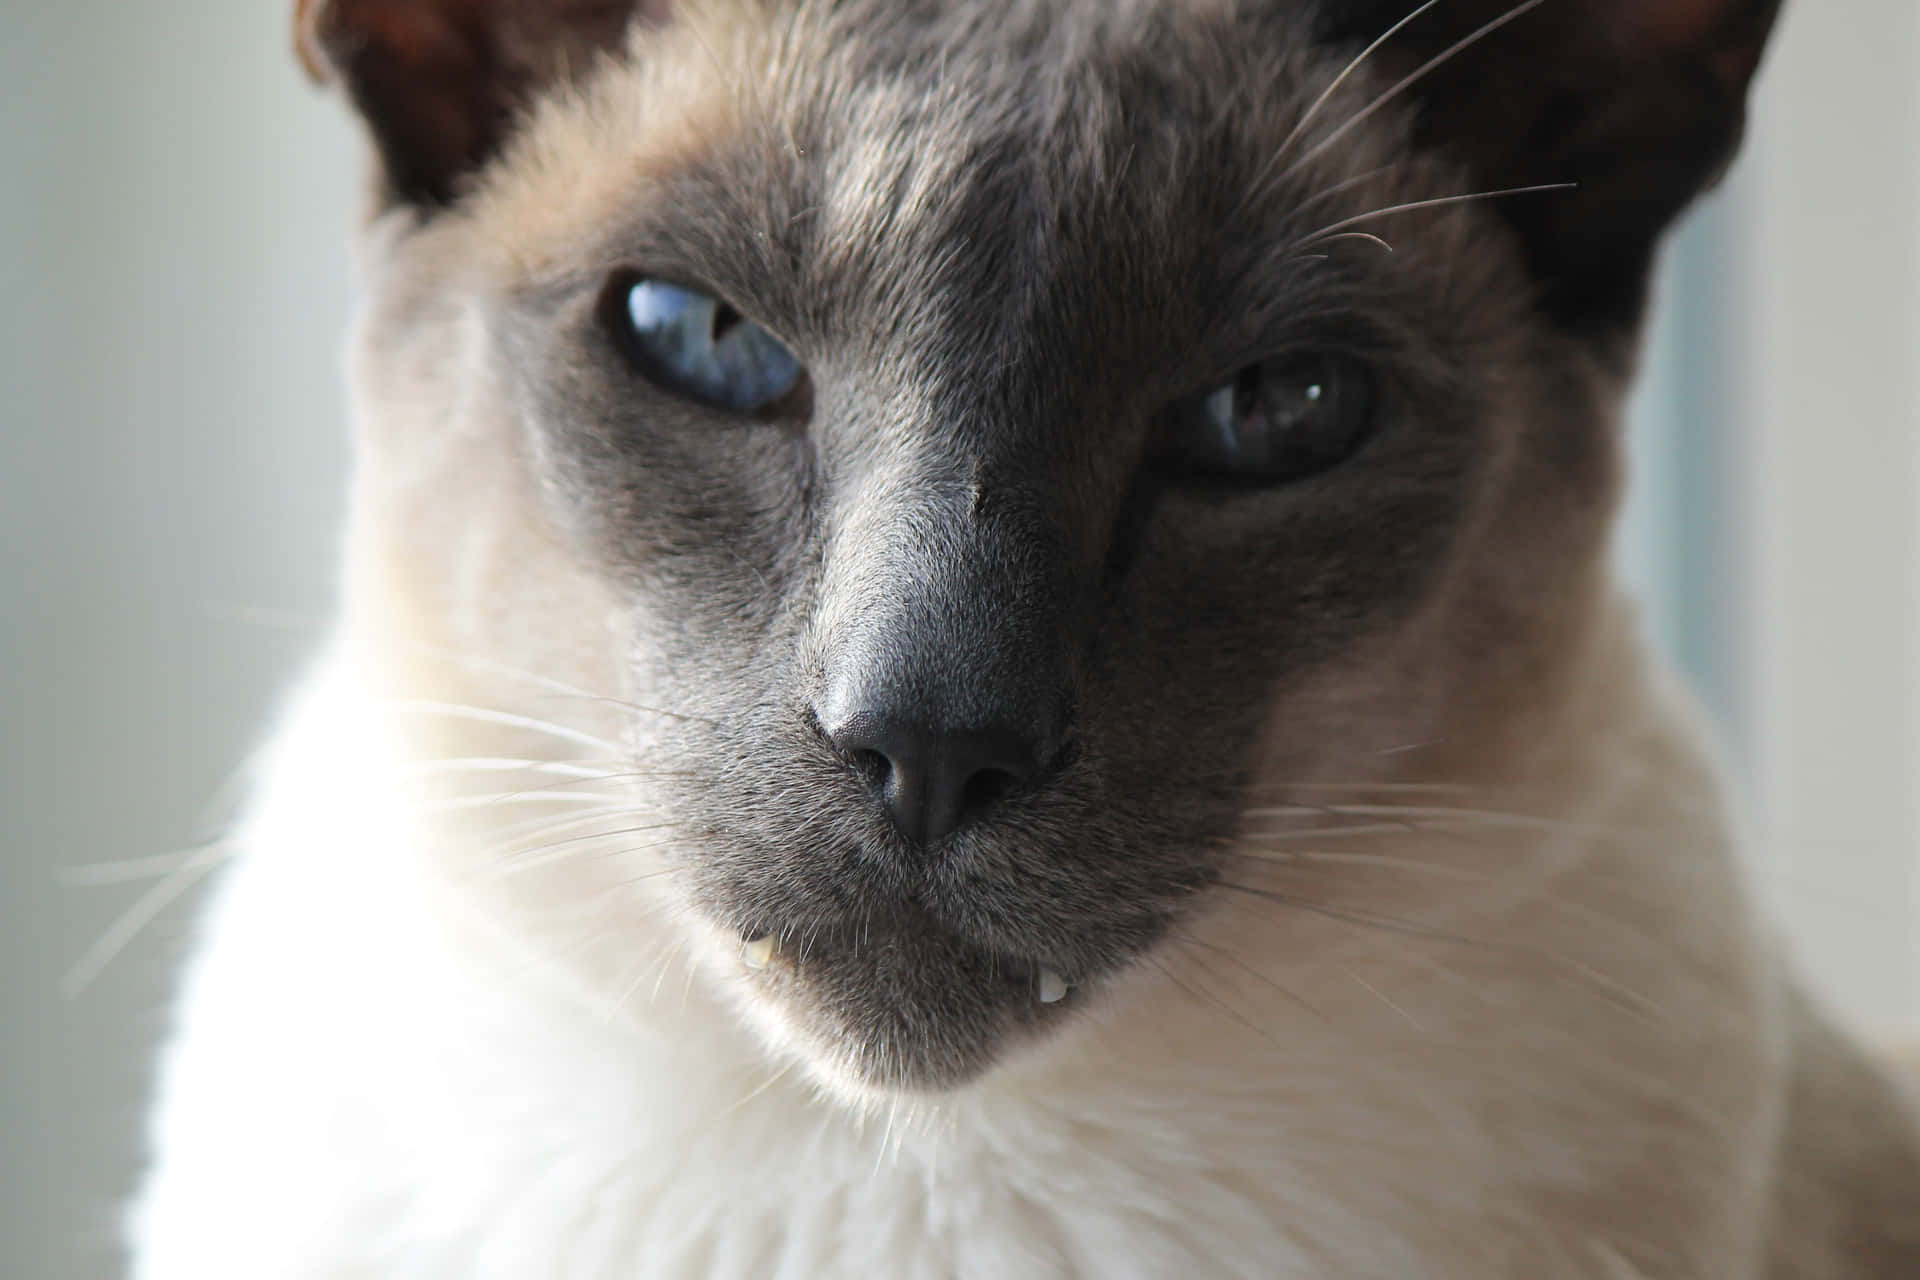 A Cat With Blue Eyes